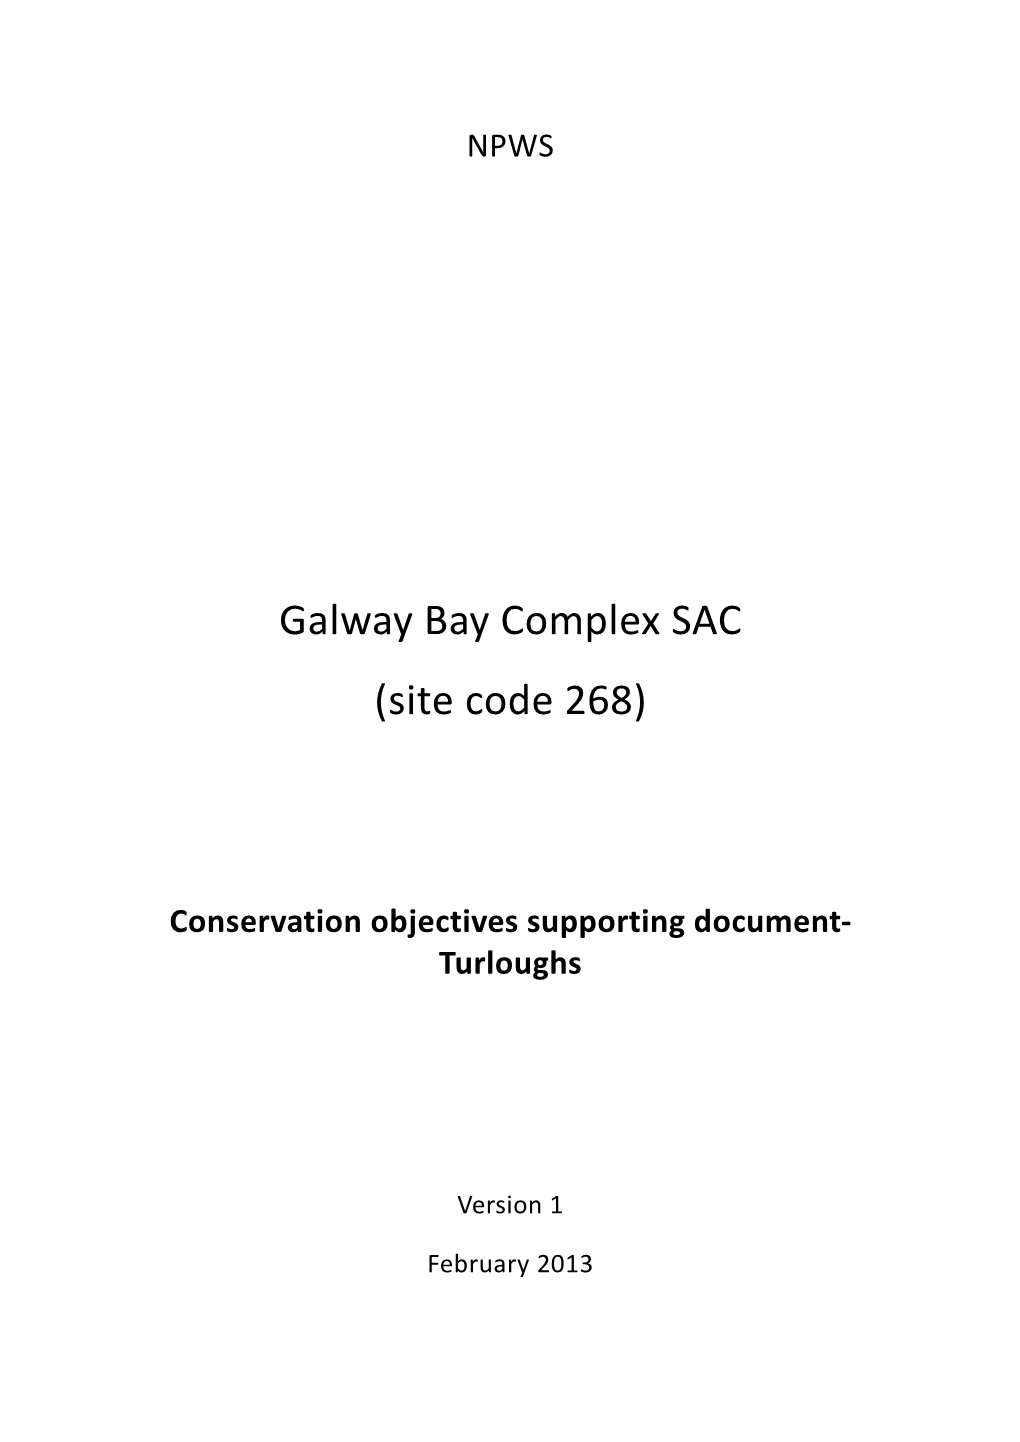 Galway Bay Complex SAC (Site Code 268)